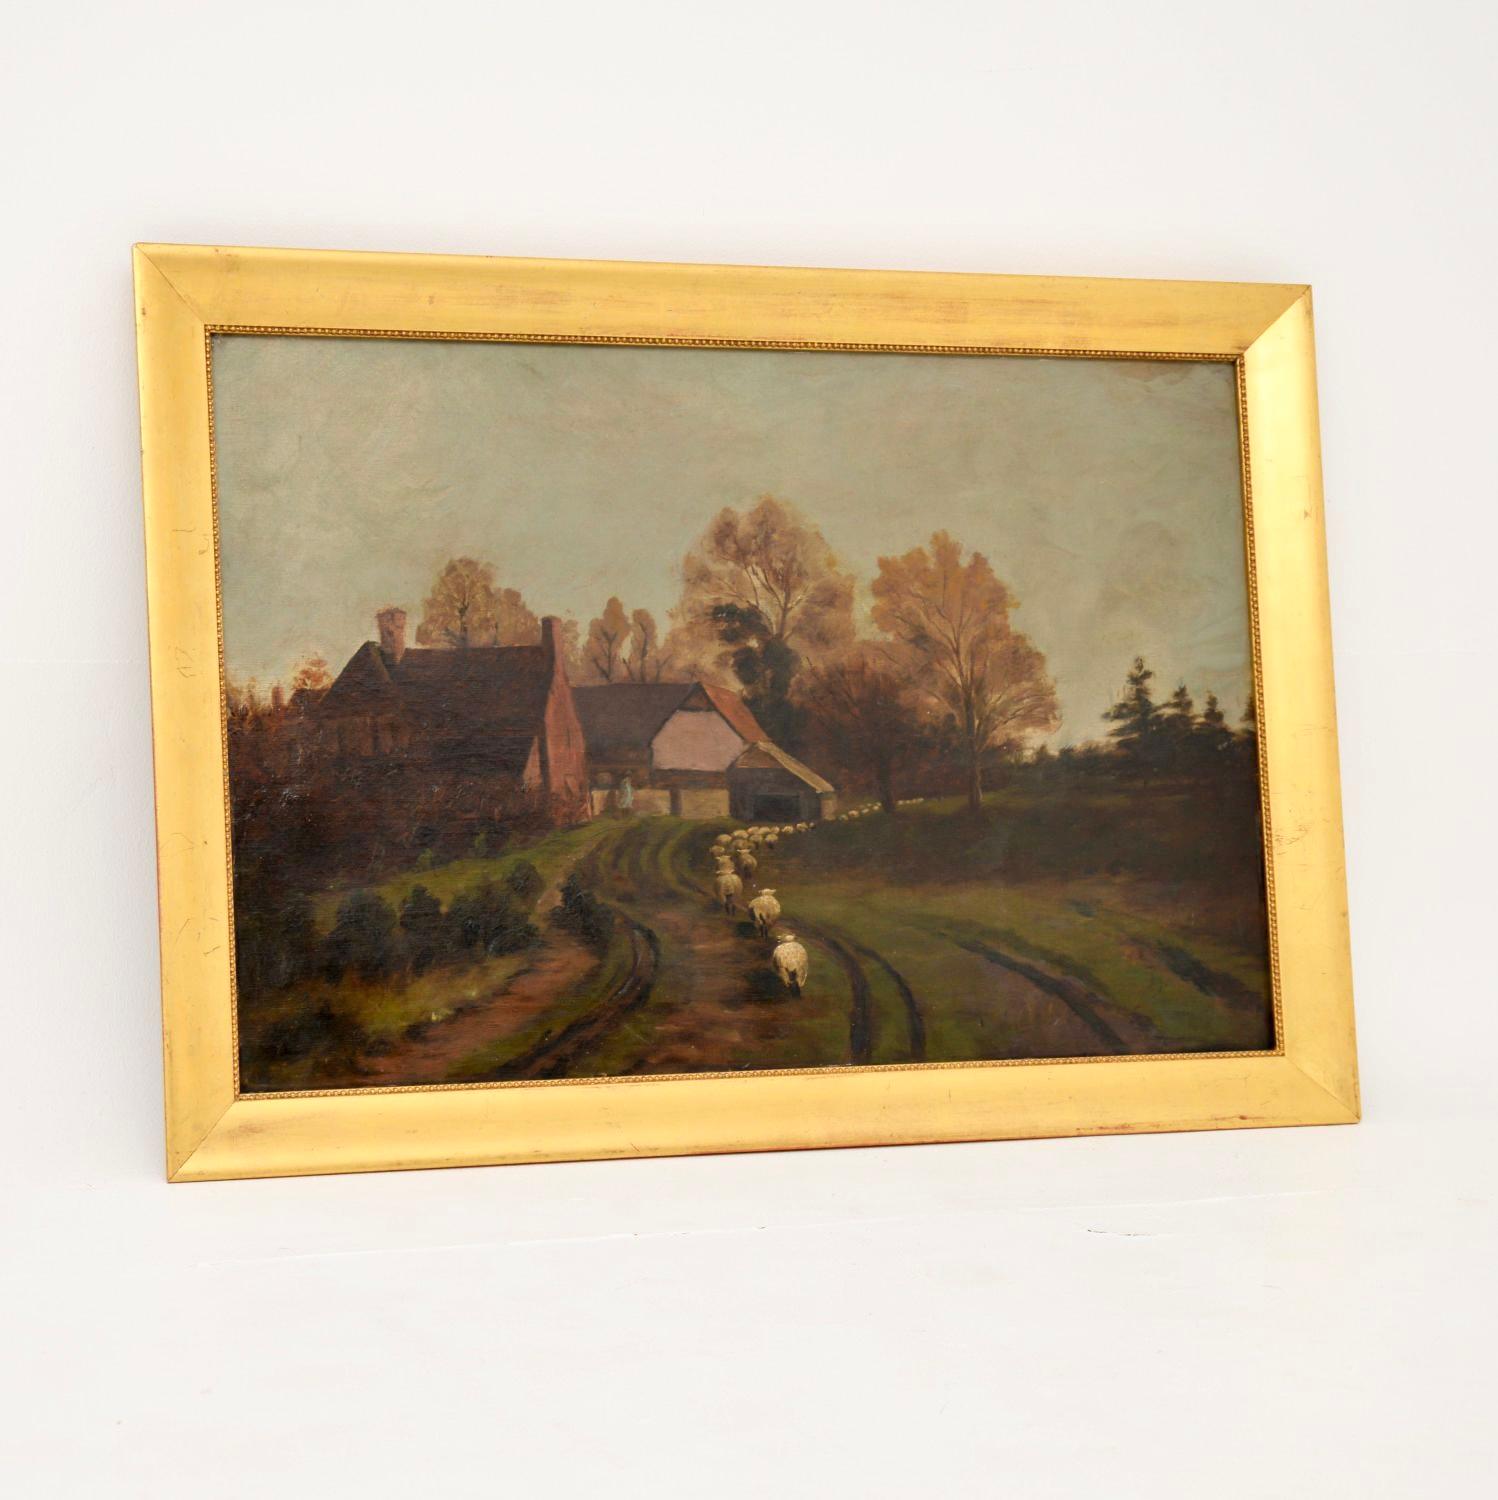 A charming antique Victorian landscape oil painting. This is English, it dates from around the 1860-1880 period.

It is beautifully executed and depicts a countryside scene of sheep being herded along a country road.

It has darkened slightly